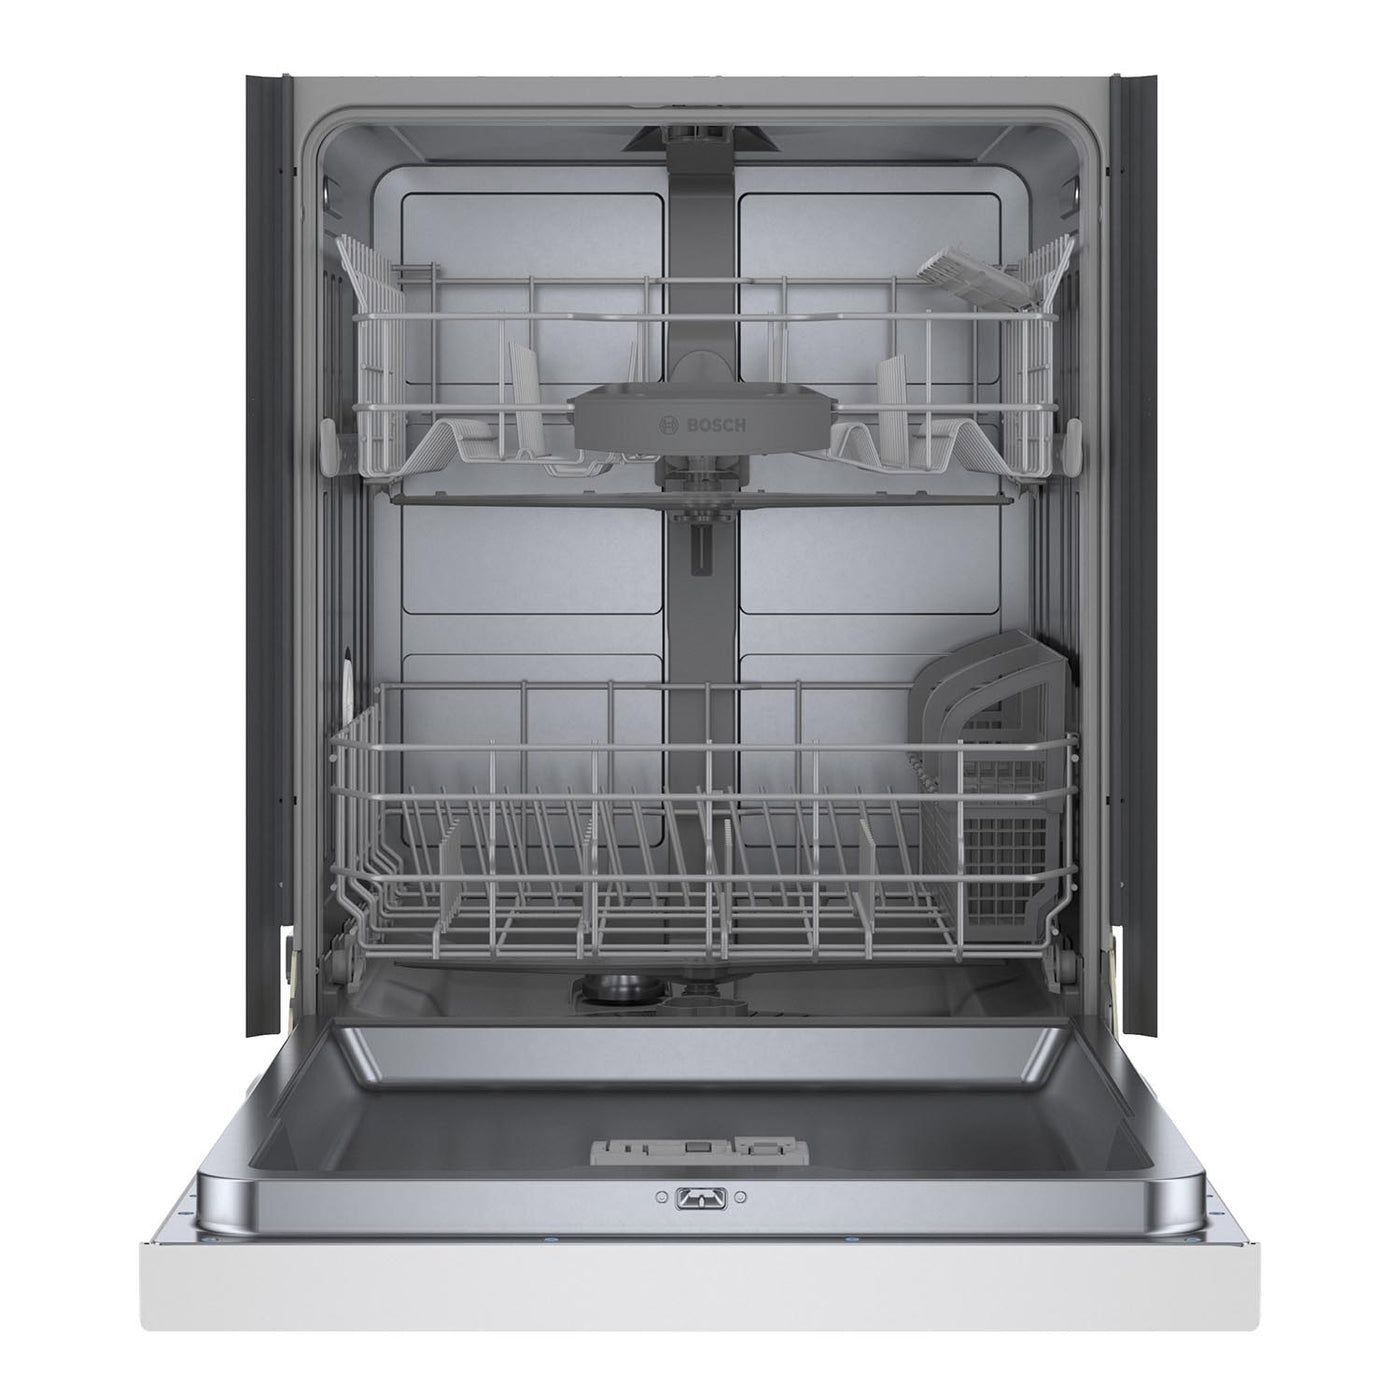 Bosch White 24" Smart Dishwasher with Home Connect - SHE3AEM2N